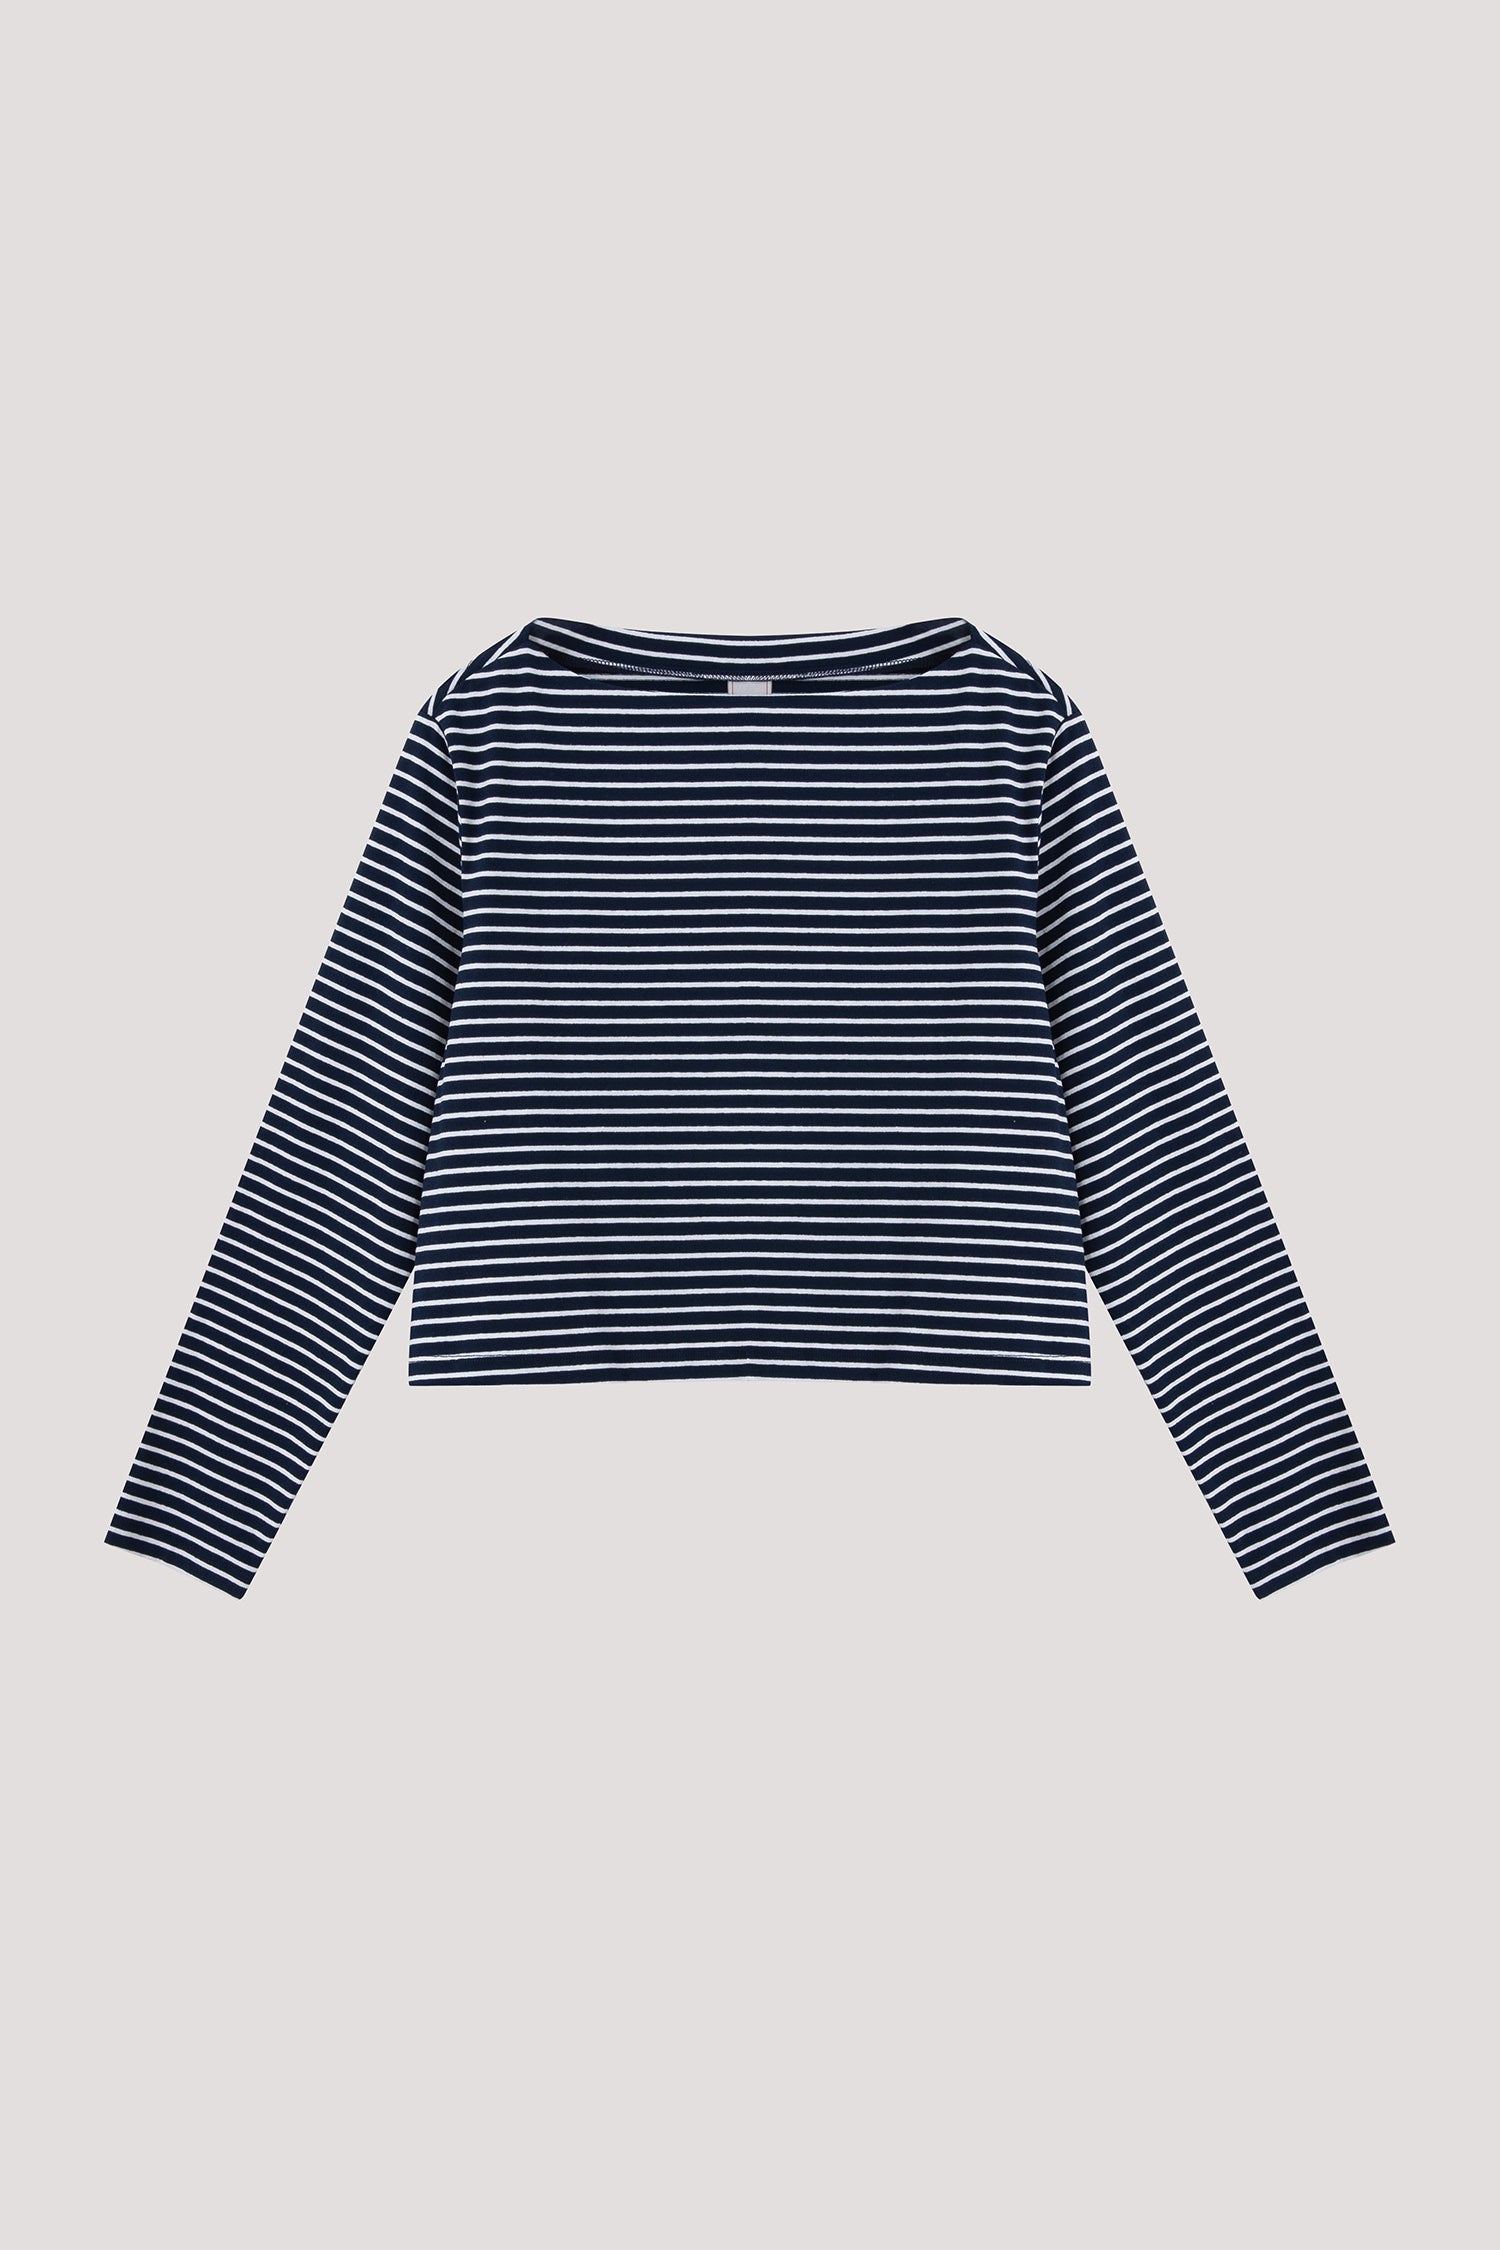 Boat Neck Jersey Top